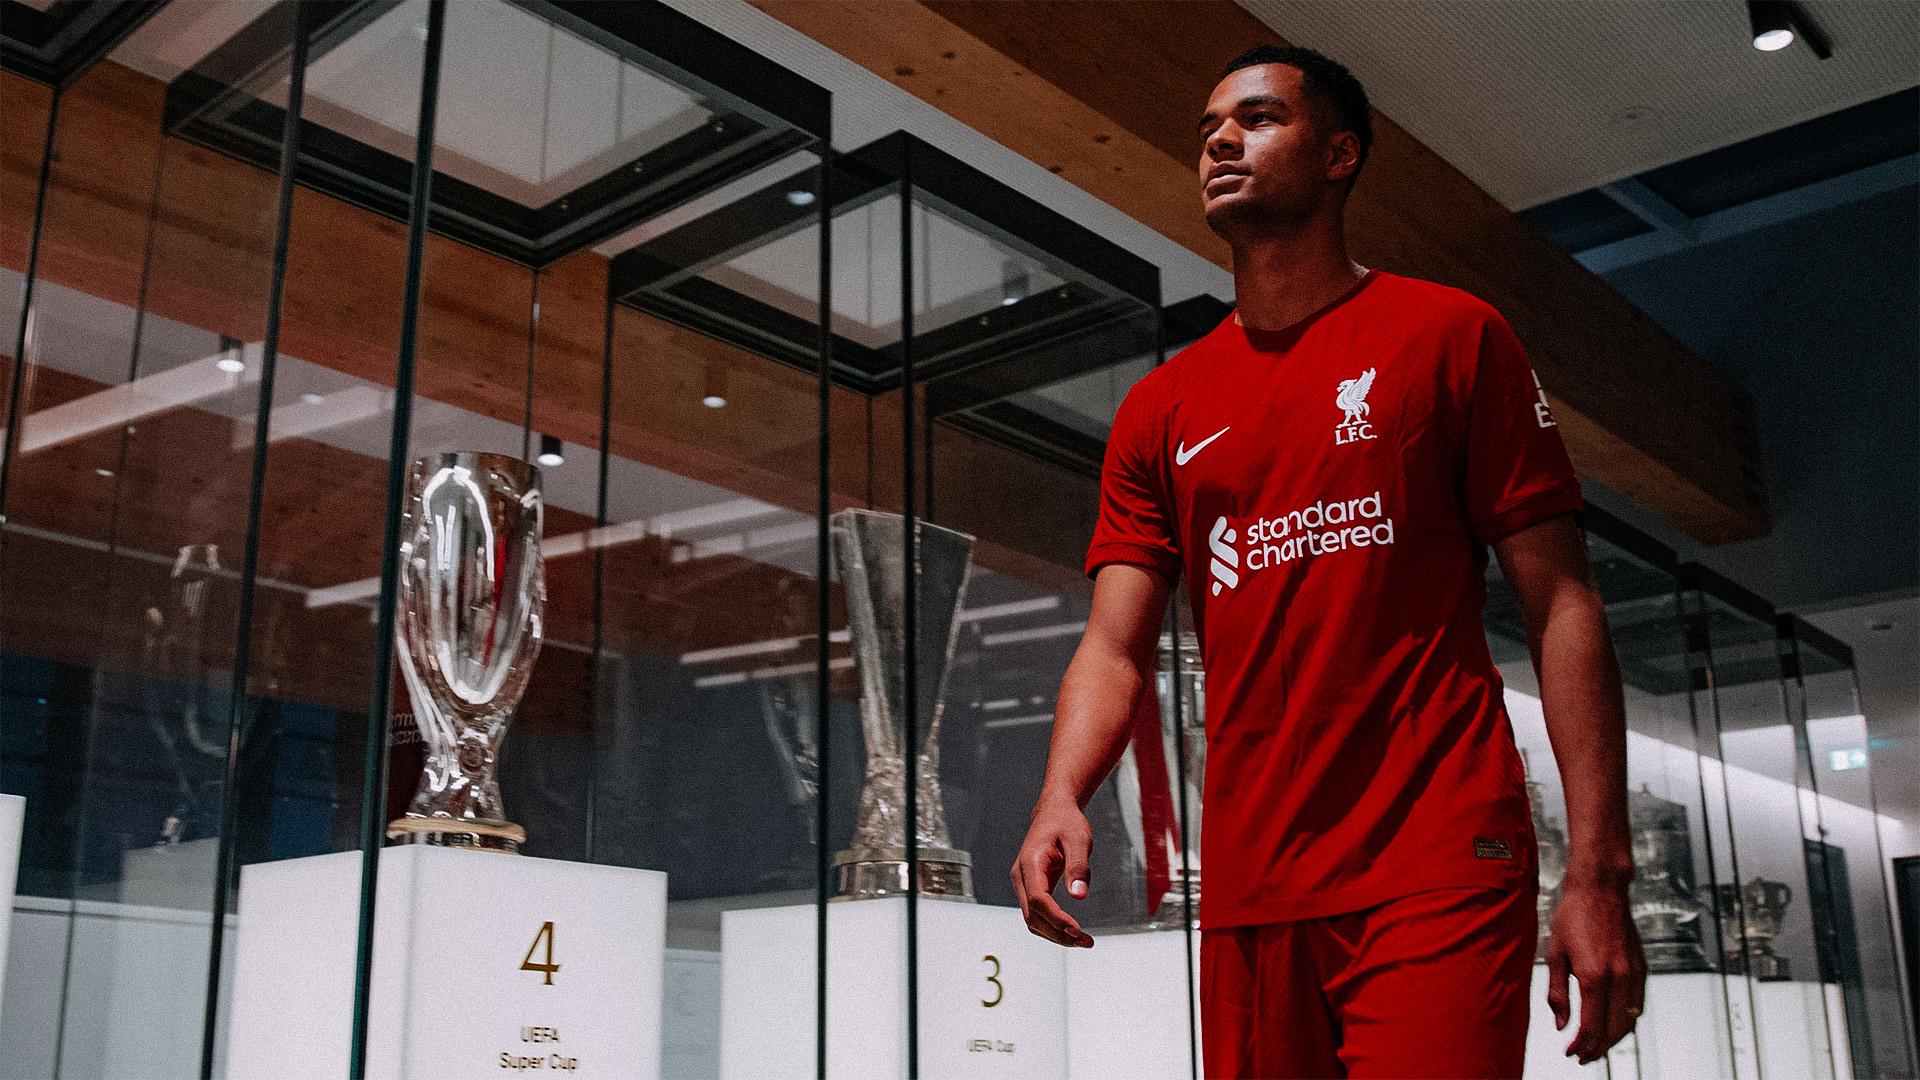 Watch: Behind the scenes on Cody Gakpo's first day at LFC - Liverpool FC